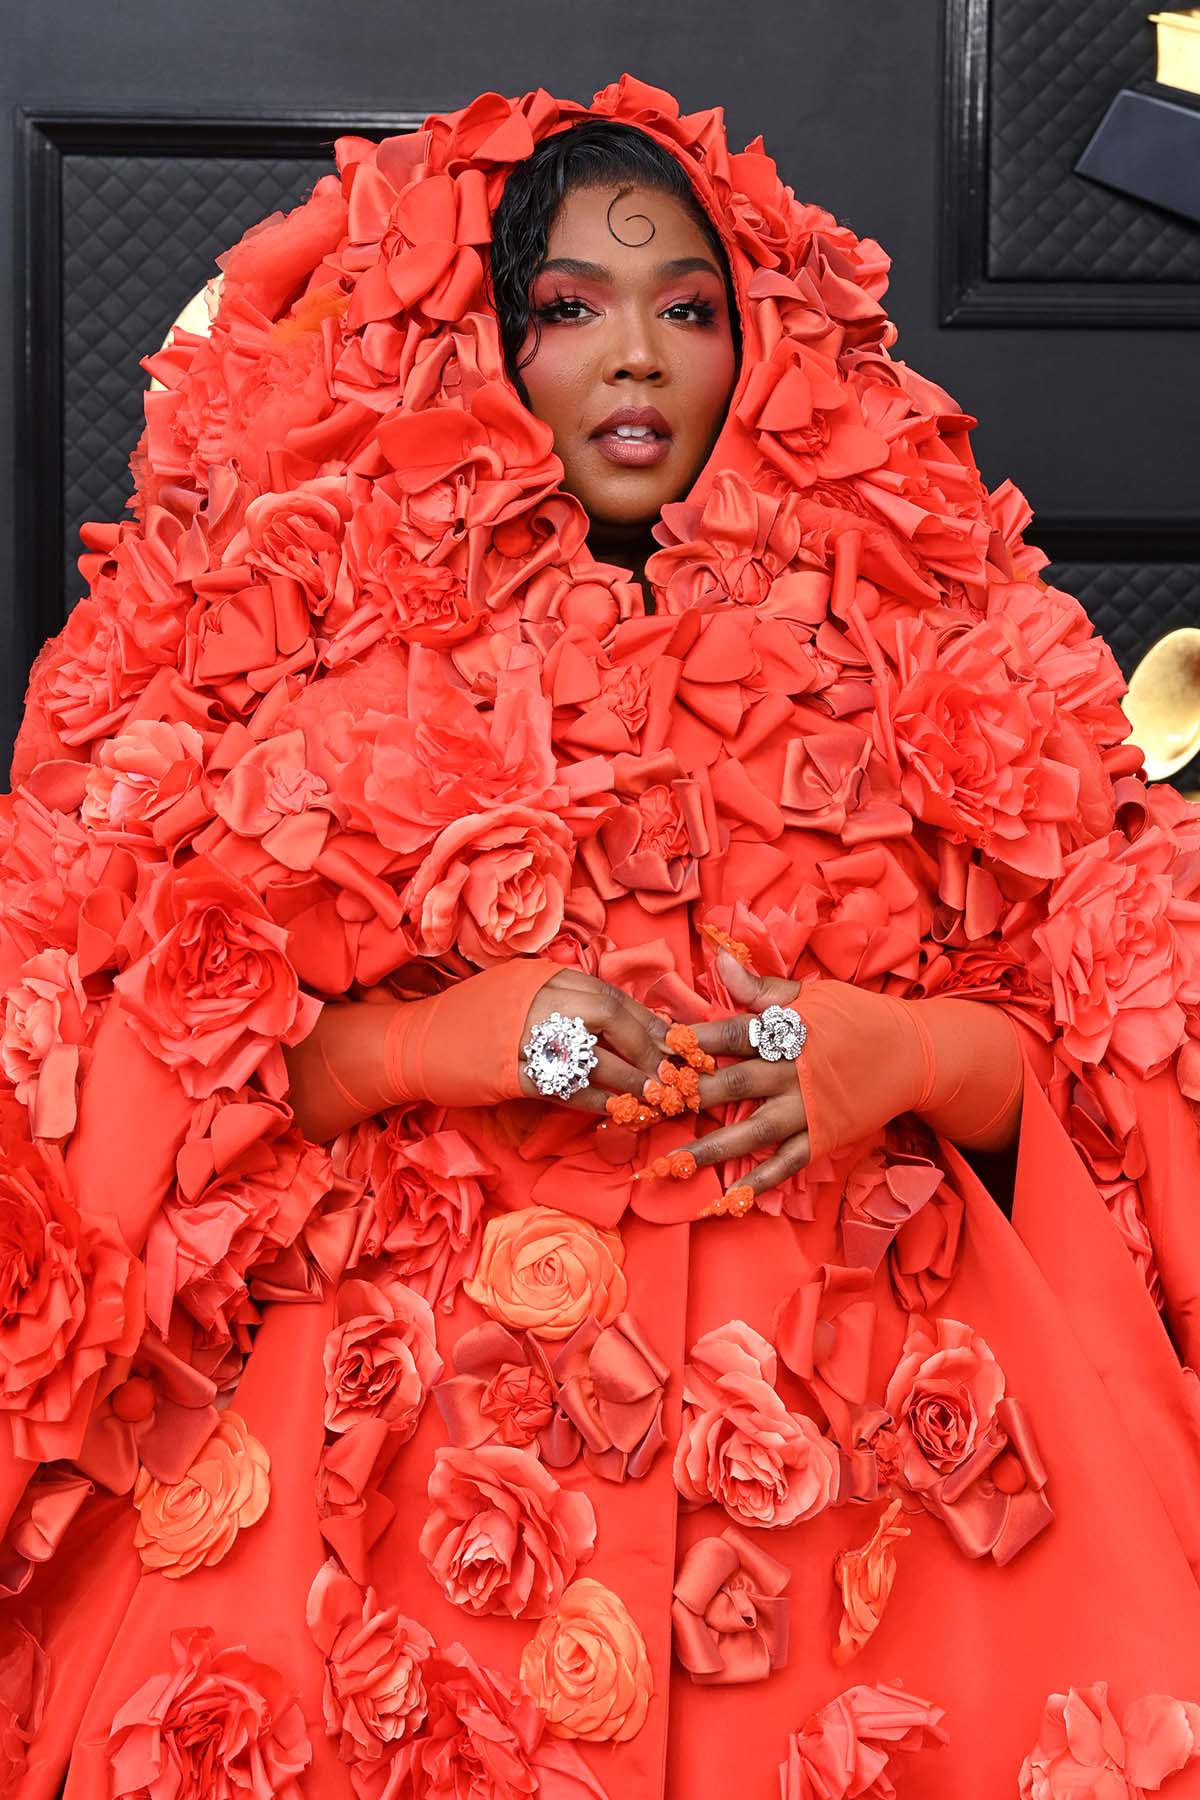 All the Red-Carpet Looks from the 2023 Grammys